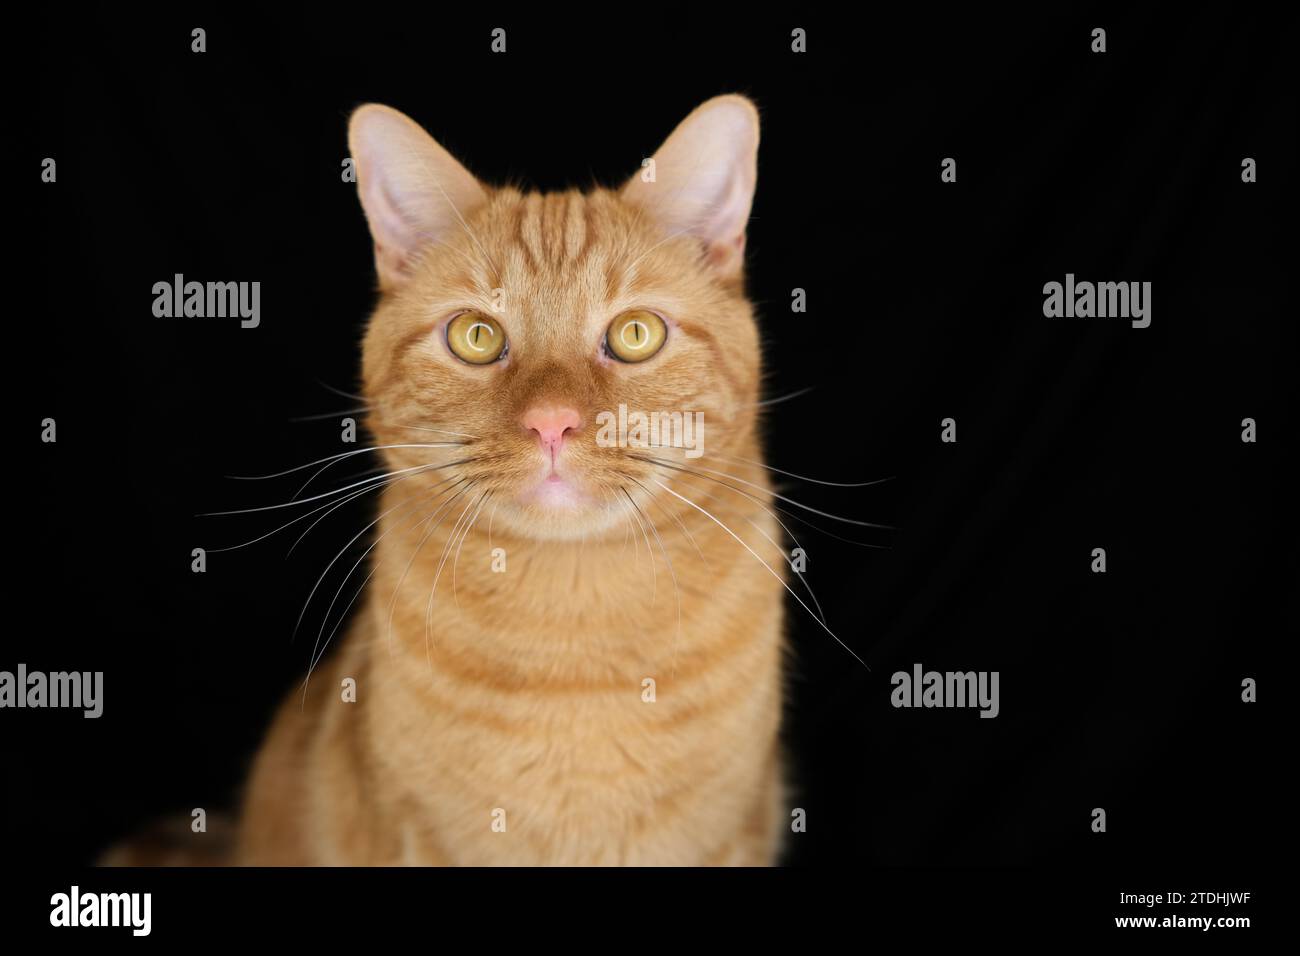 Orange tabby cat looking at the camera against black background Stock Photo